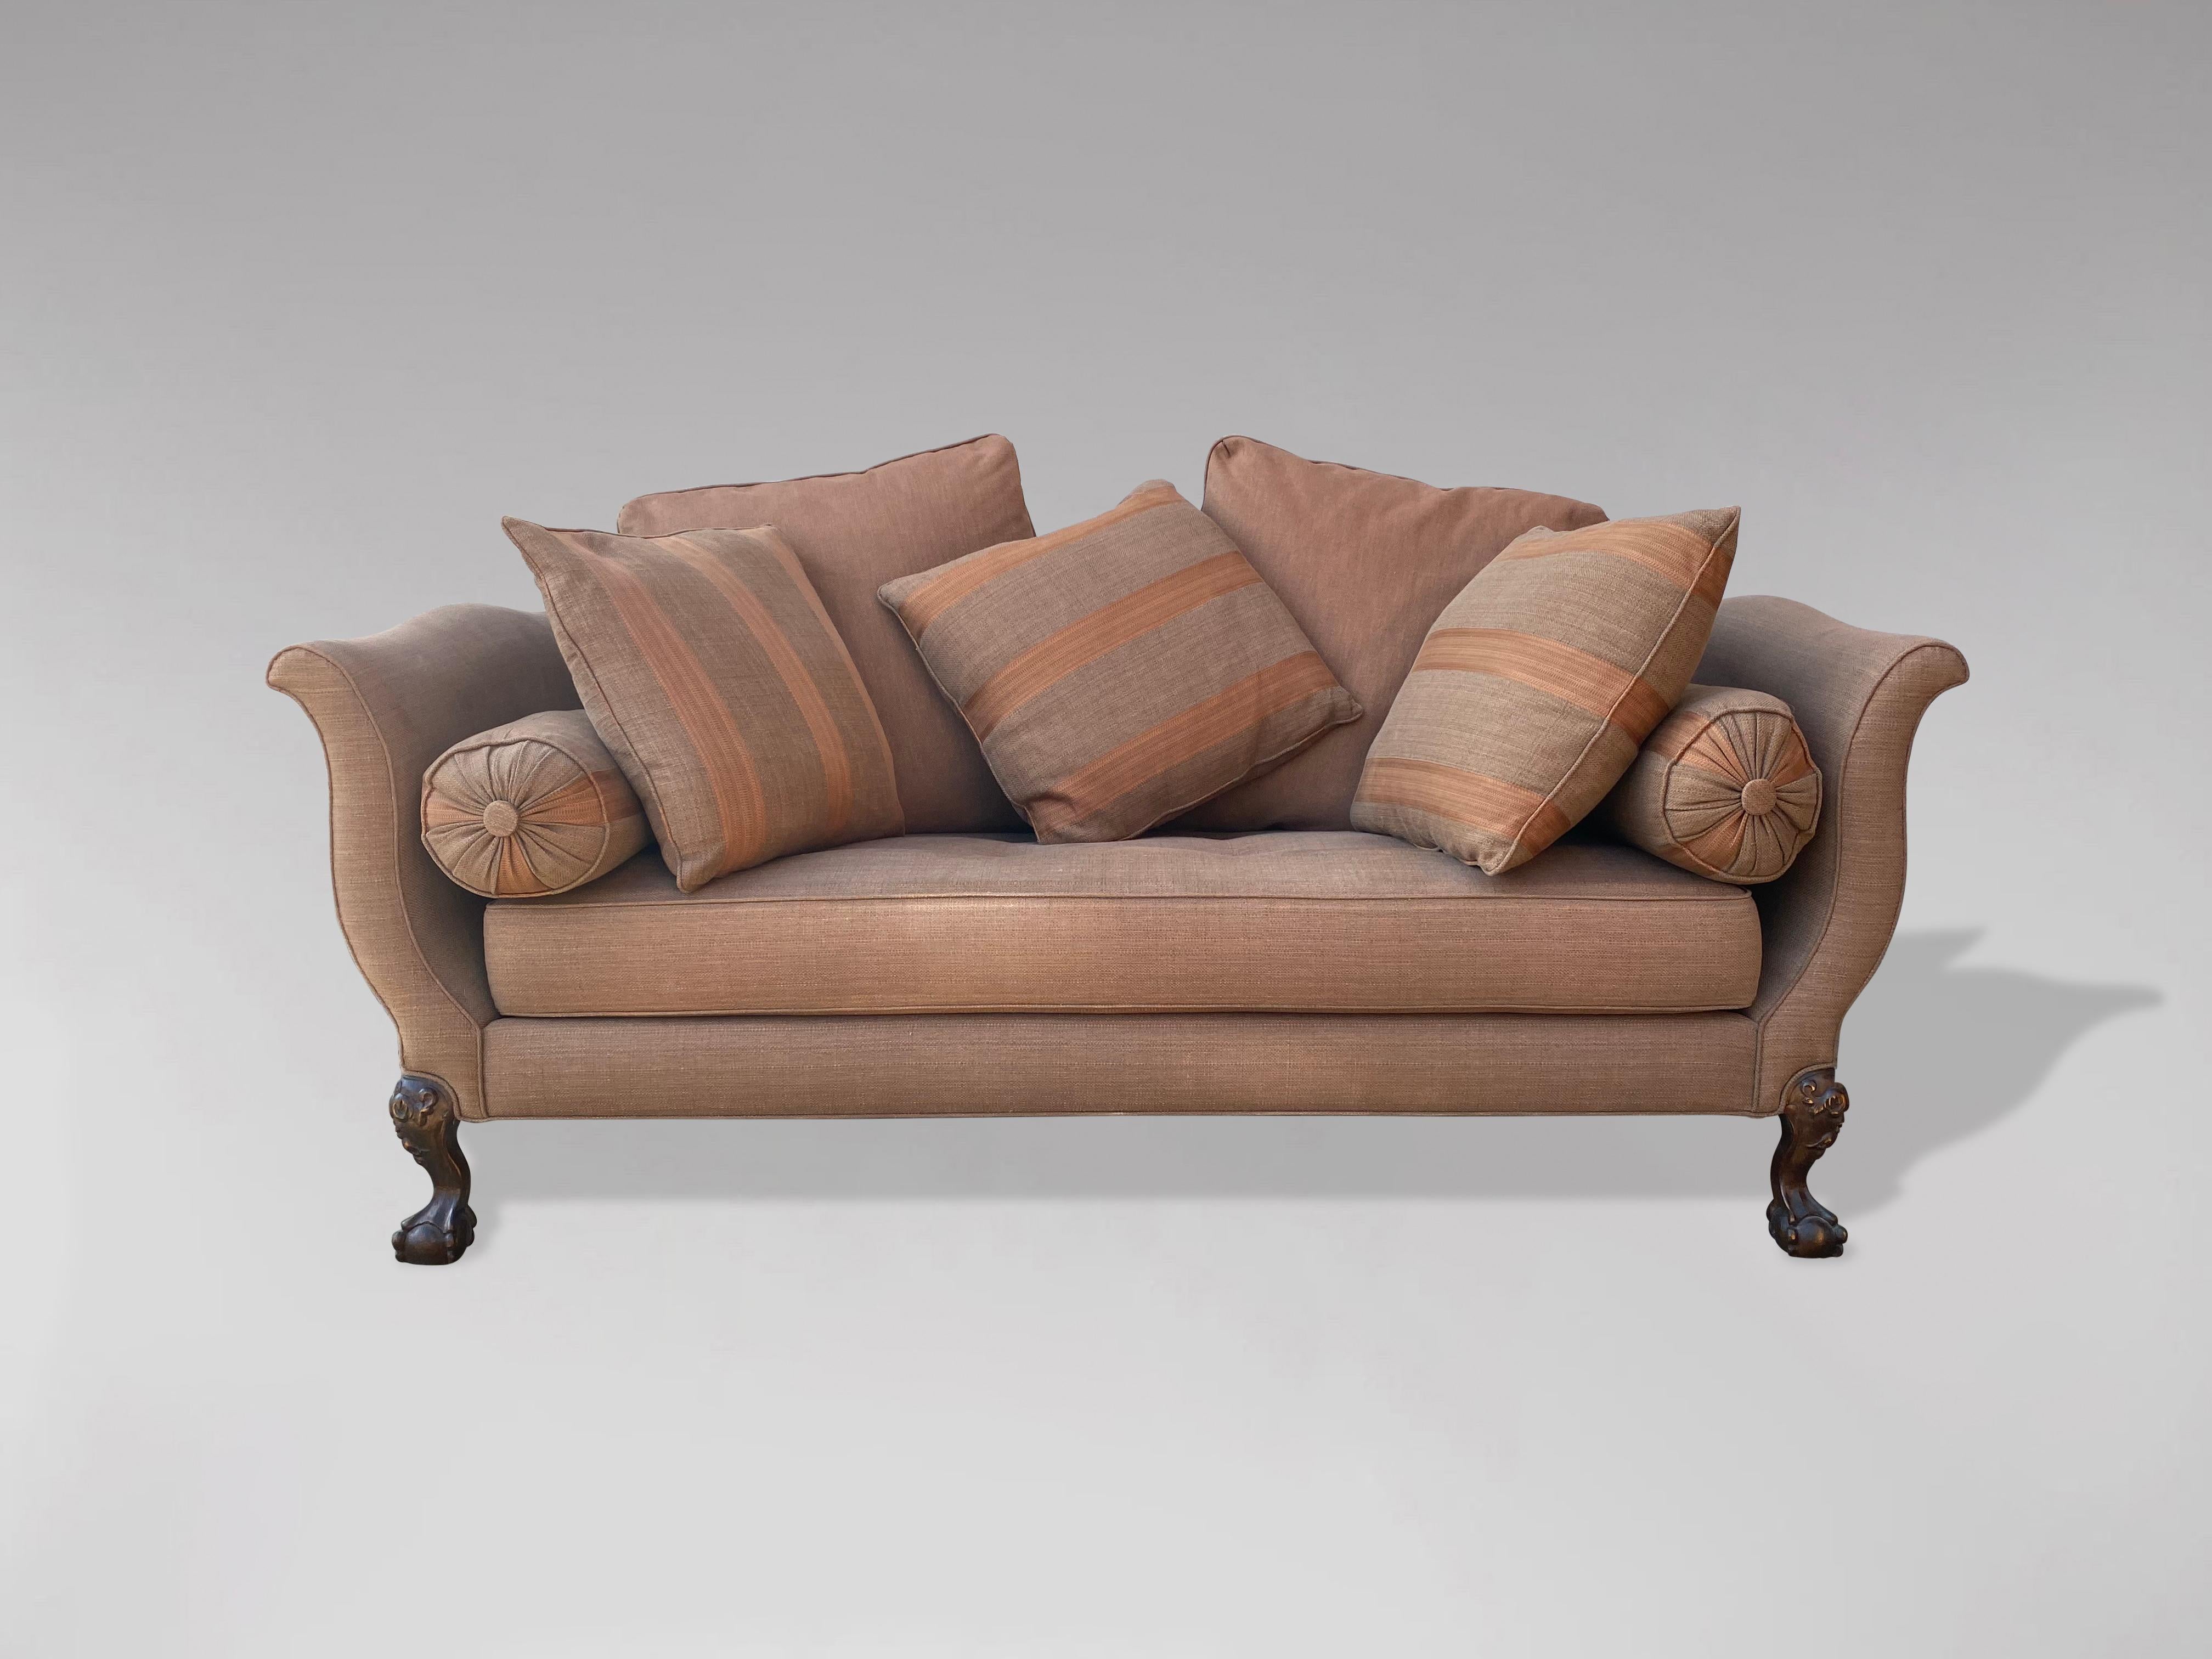 A magnificent country house example of an early 20th century, Edwardian period, George II style camel back sofa. Having shaped back and outswept scrolled and curved arms. Standing on mahogany carved cabriole legs ending on claw and ball feet. All